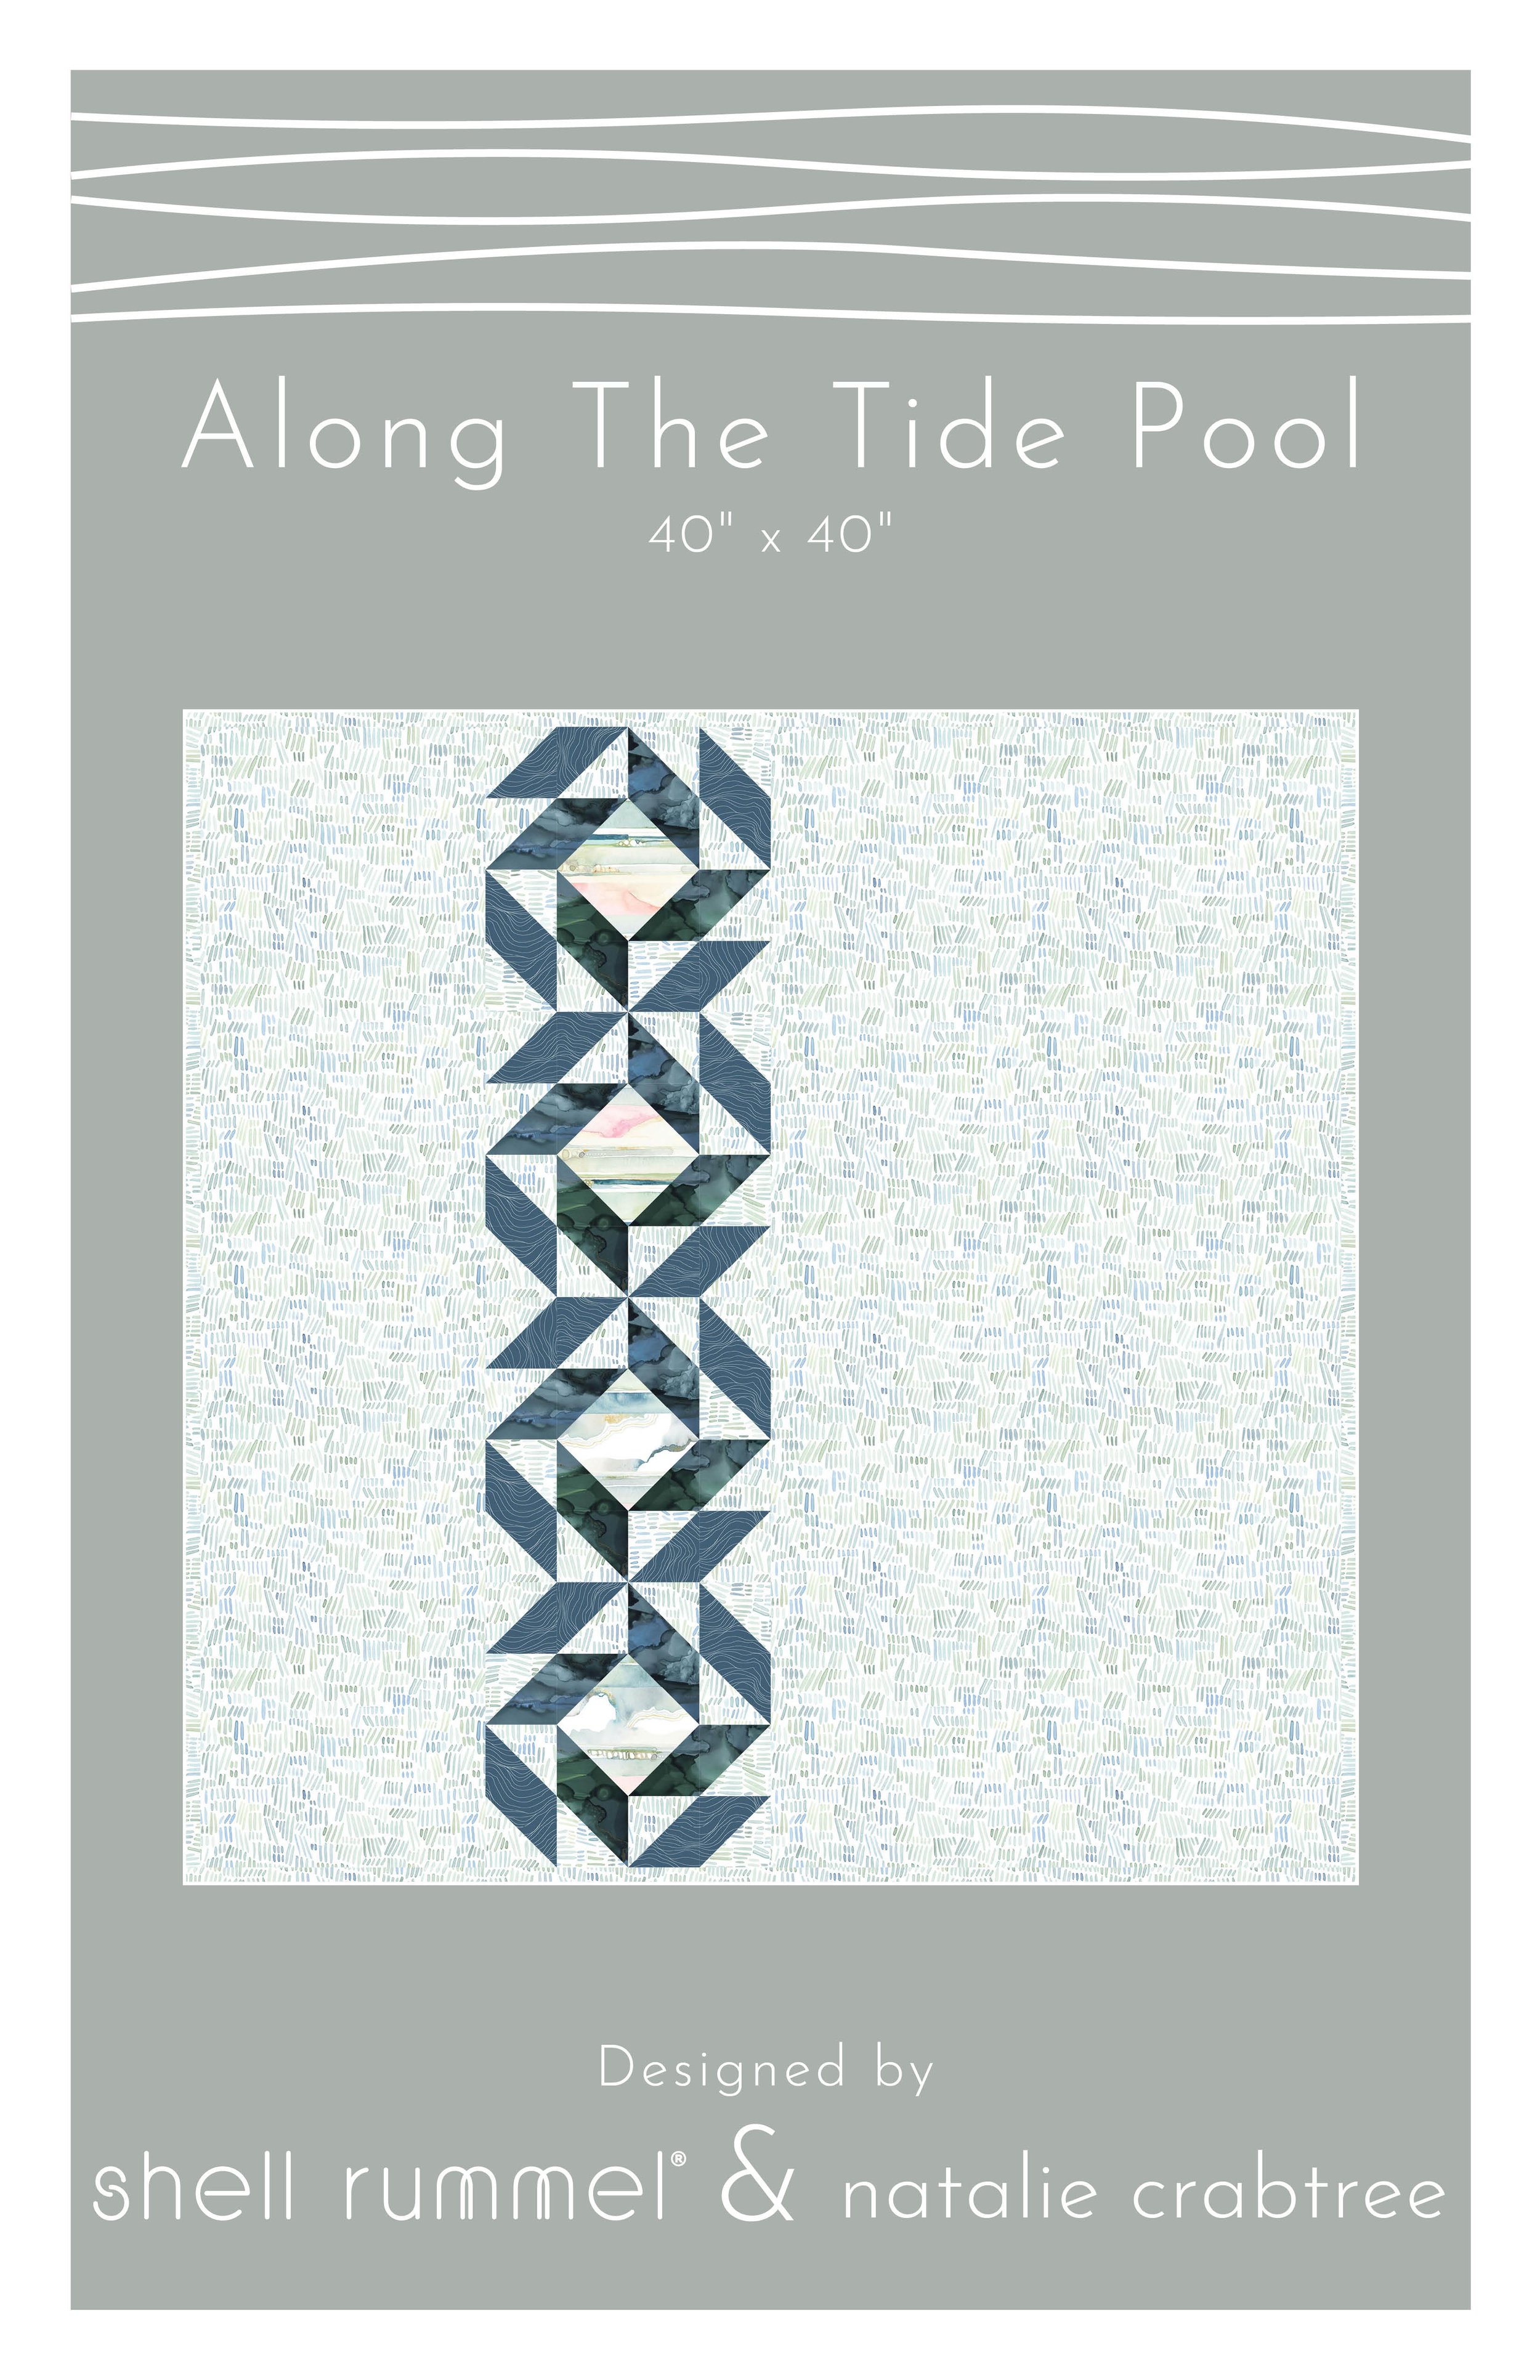 Along the Tidepool Recolor Covers.jpg